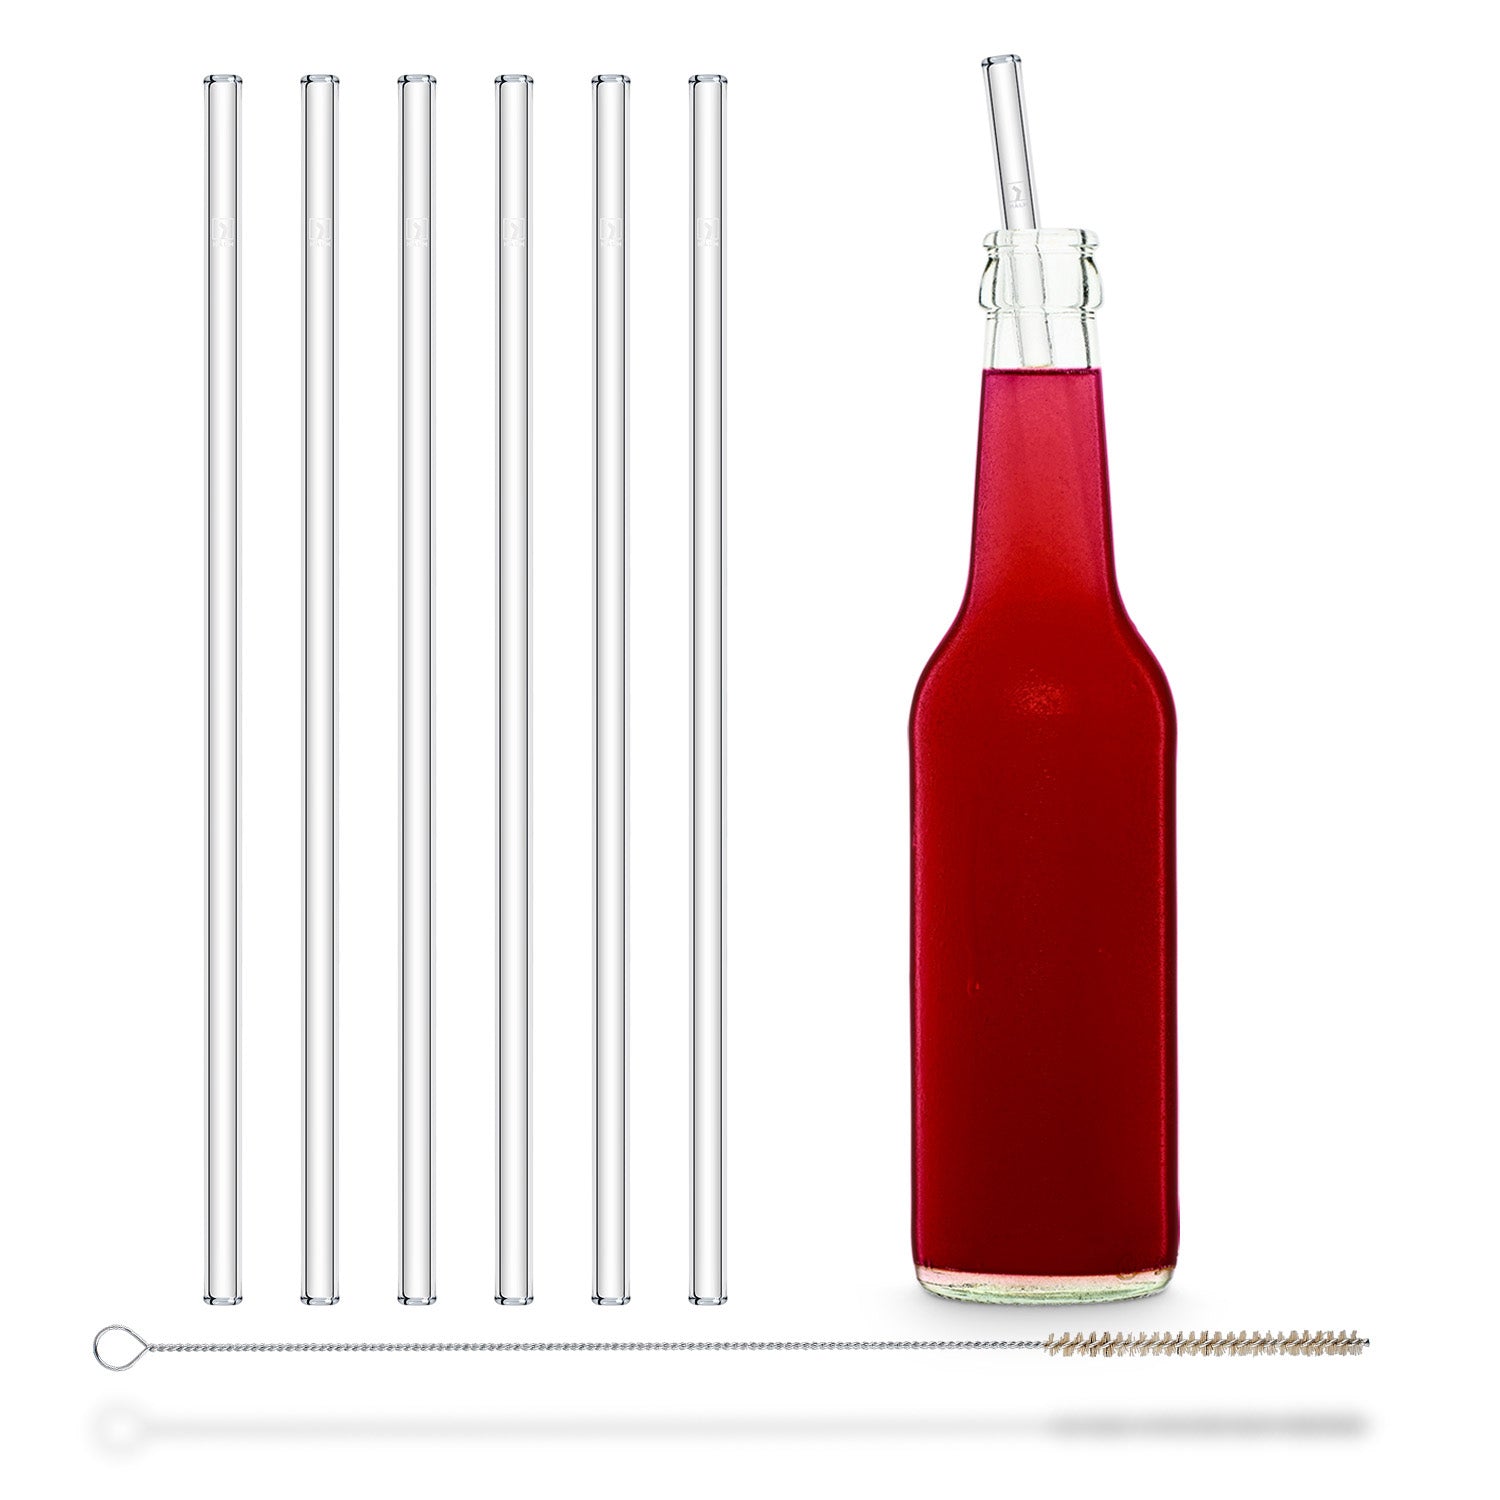 Halm Glass Straws - 6 Reusable Drinking Straws Plastic-Free Cleaning Brush - Made in Germany - Dishwasher Safe - Eco-Friendly - 23 cm 9 in x 09 cm